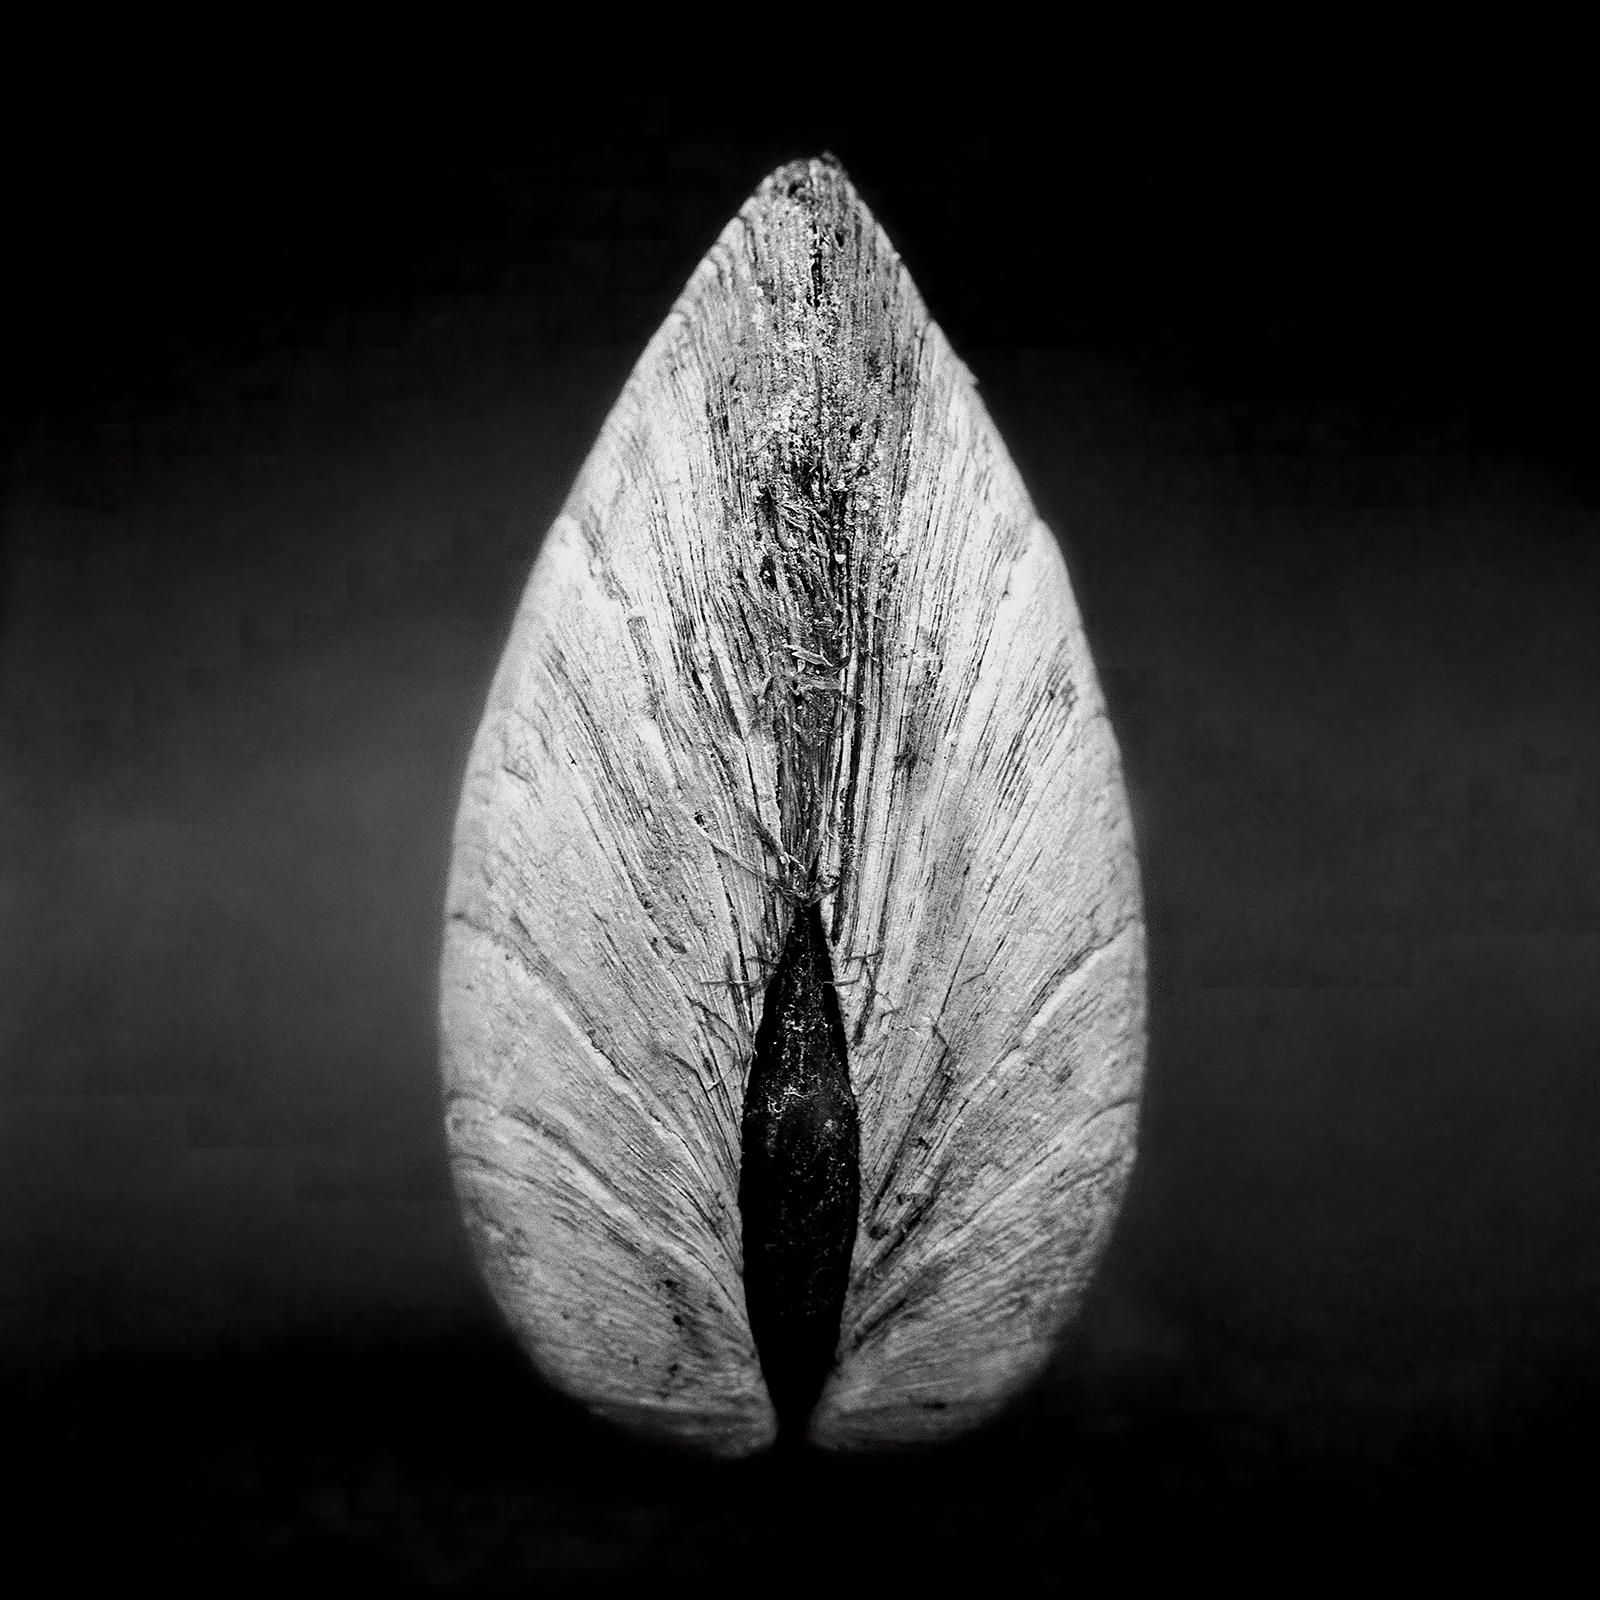 Ian Sanderson Black and White Photograph - Clam 02 - Signed limited edition Contemporary art print, Black white square 